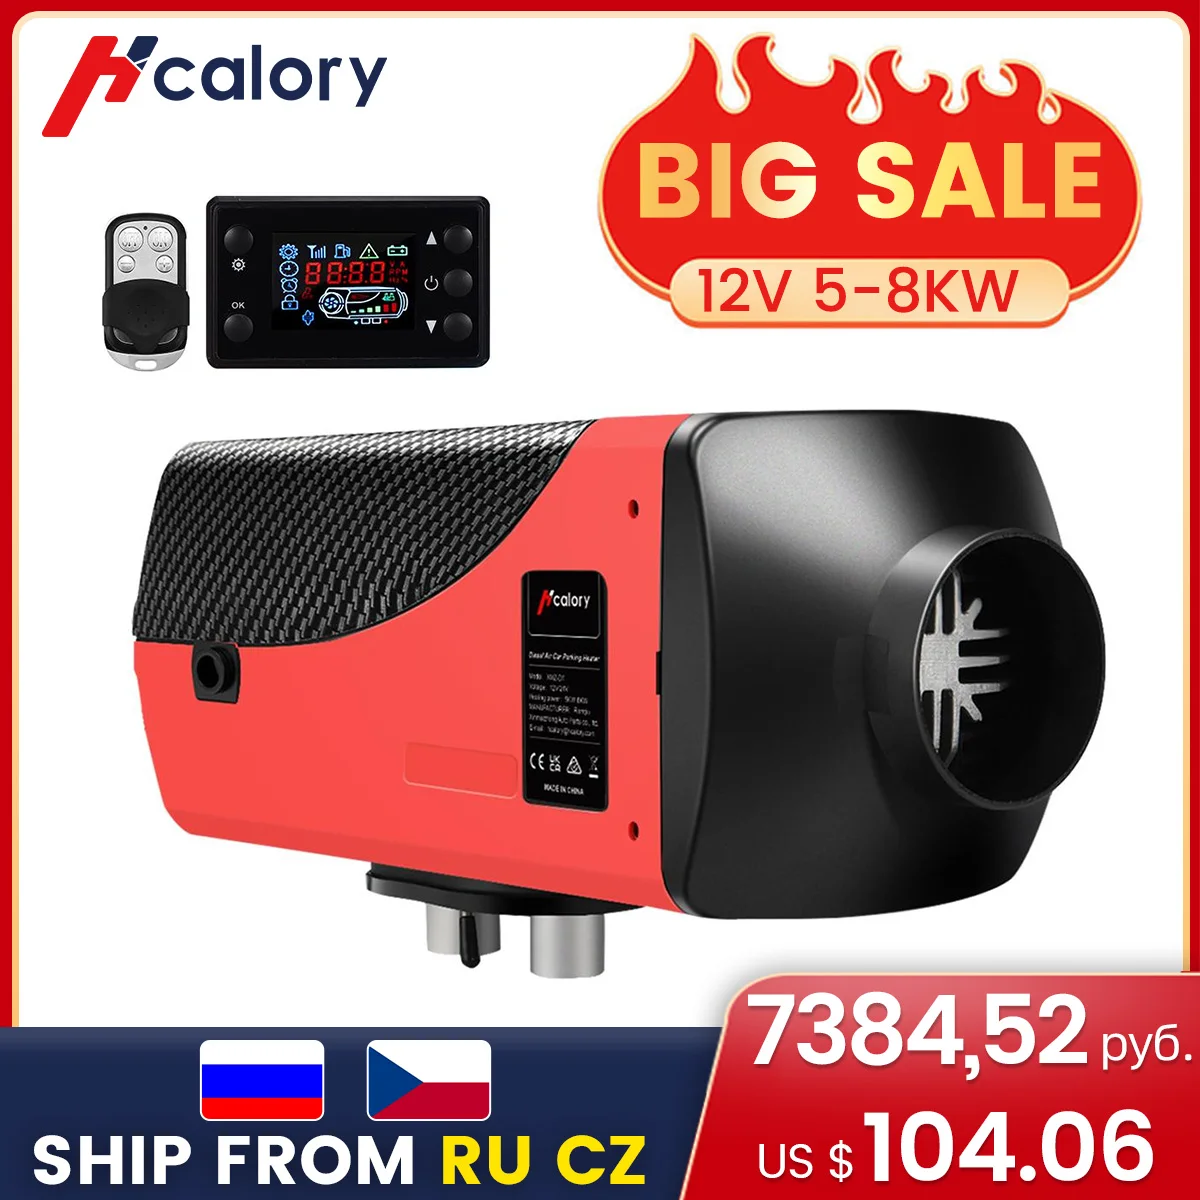 

Hcalory 5-8KW Car Heater 12V Air Diesel Parking Heater With Remote Control LCD Monitor for RV Motorhome Trailer Trucks Boats